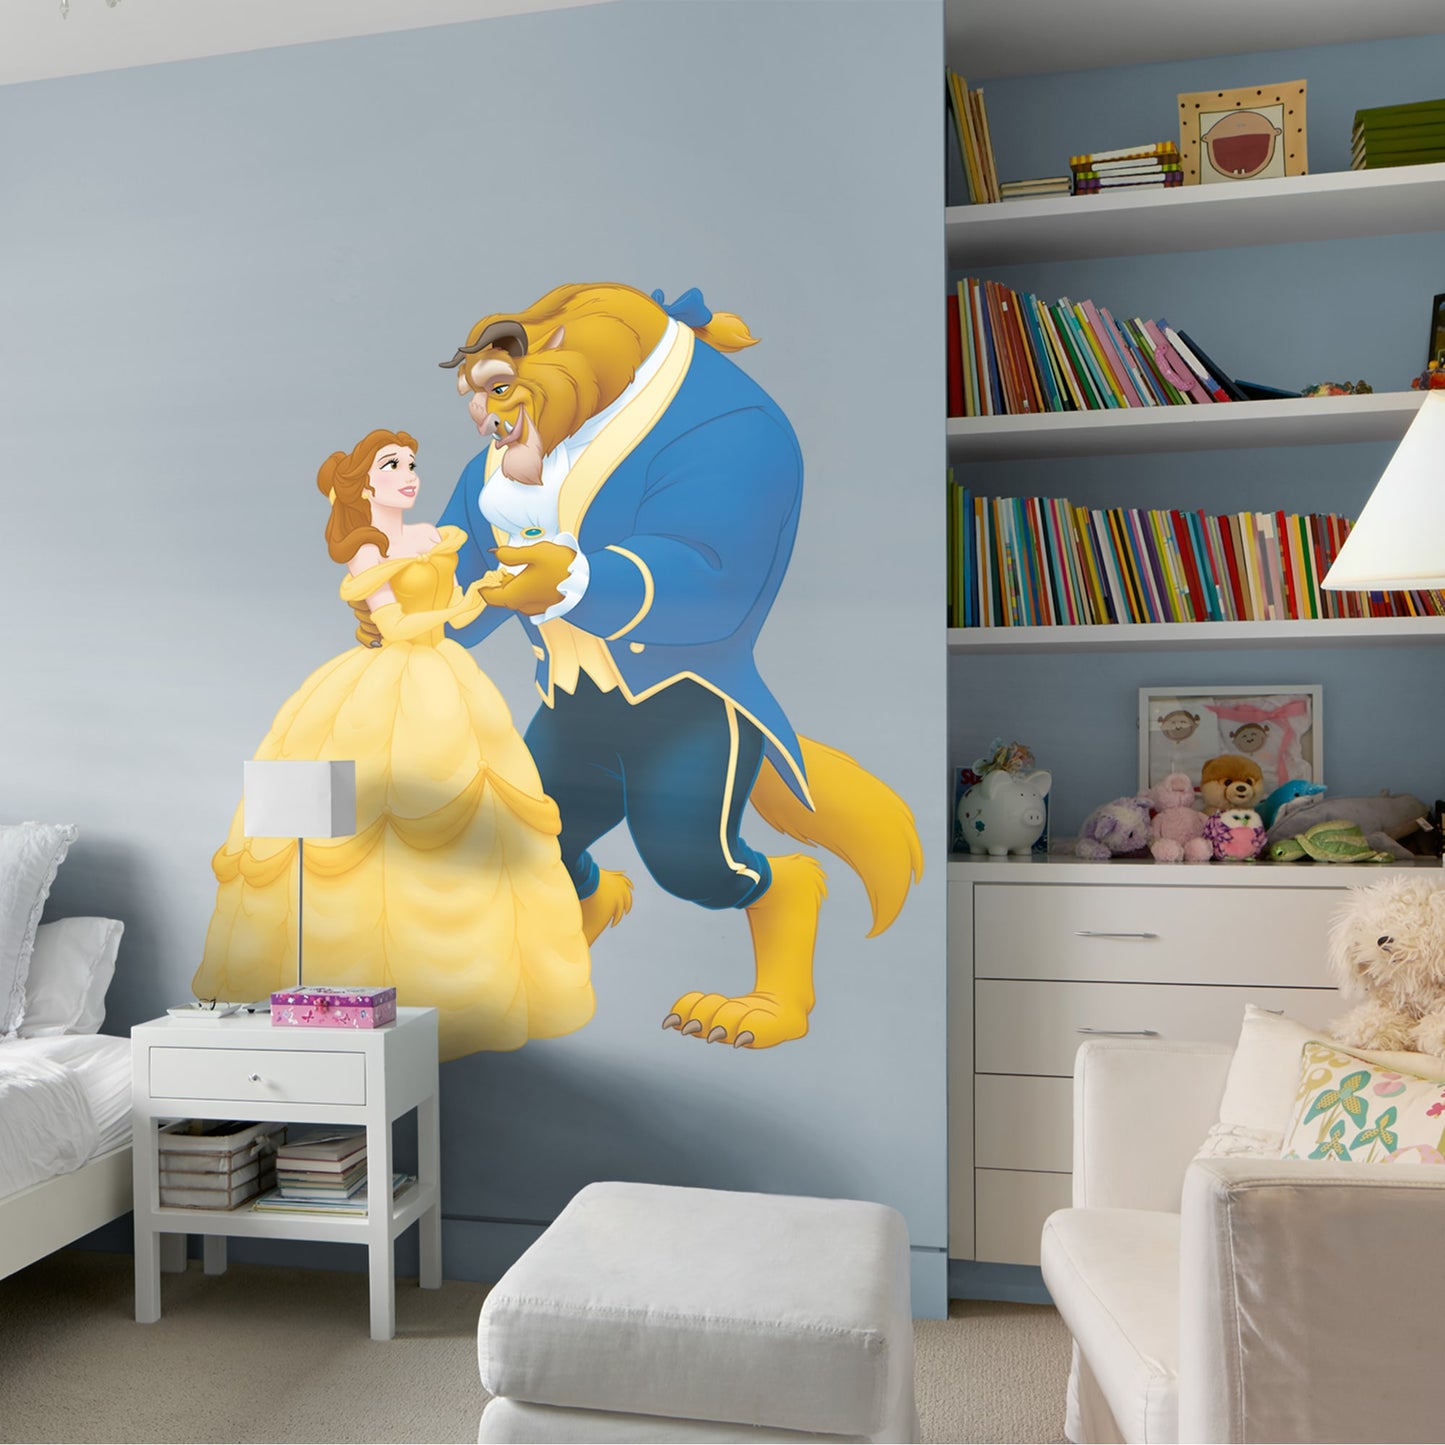 Beauty and the Beast: Belle & Beast Dancing - Officially Licensed Disney Removable Wall Decal